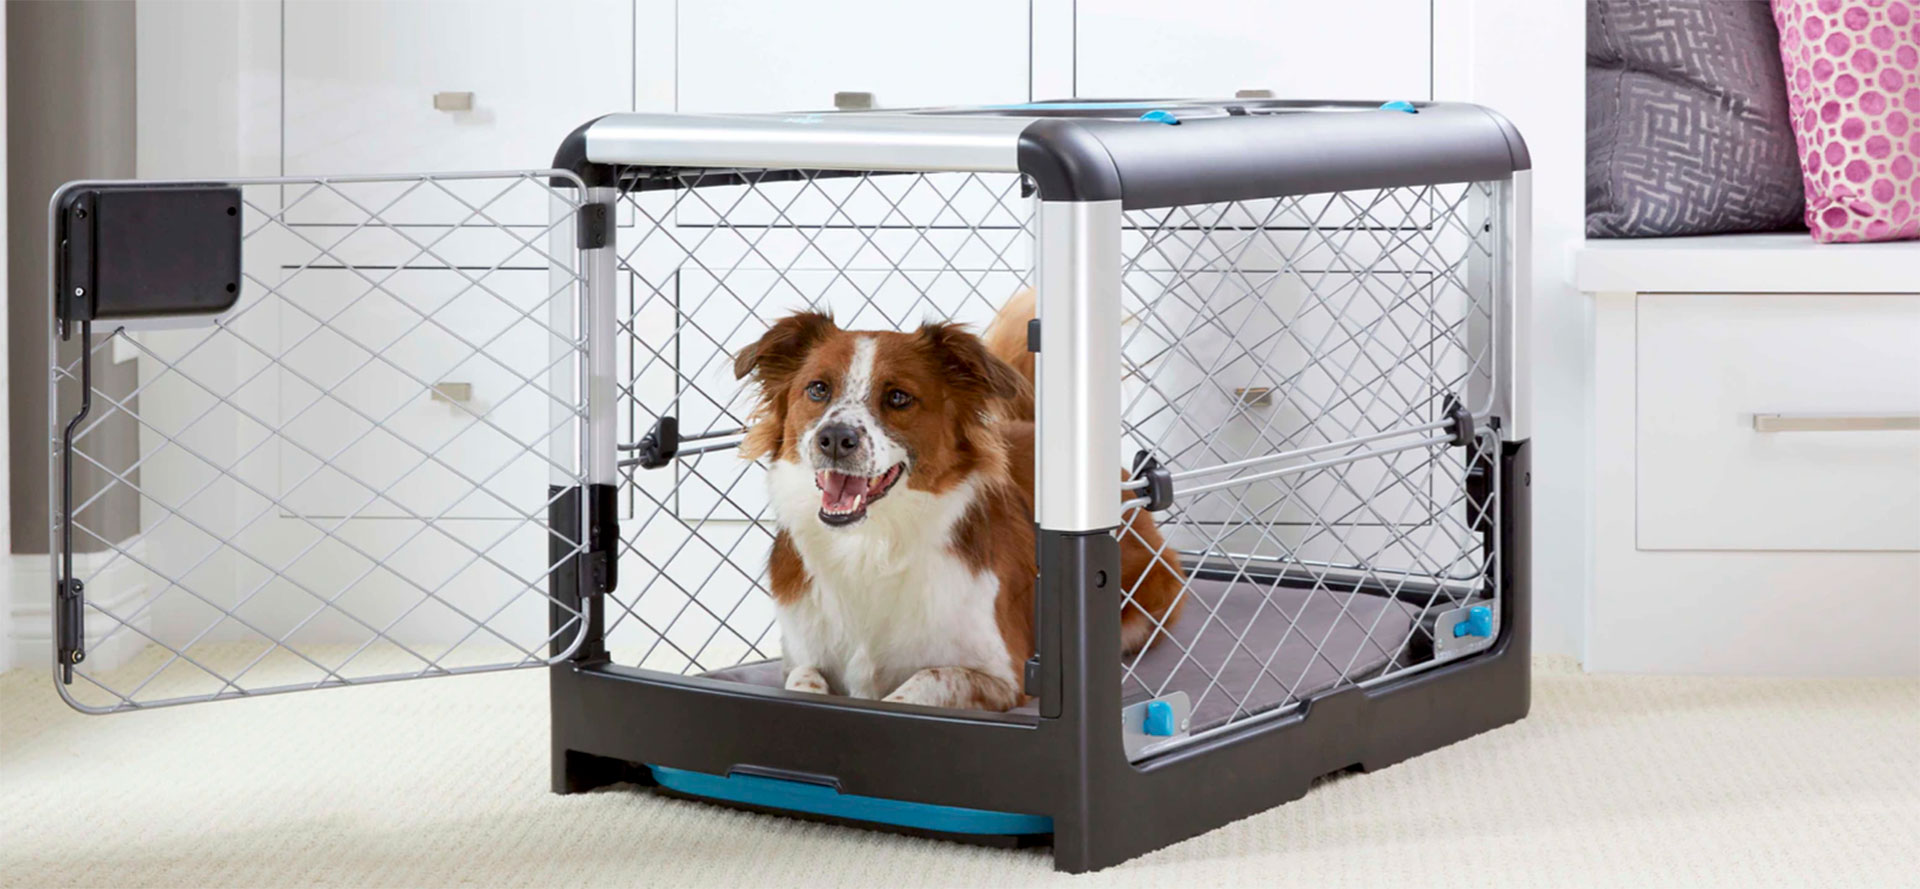 Crate for Dog.